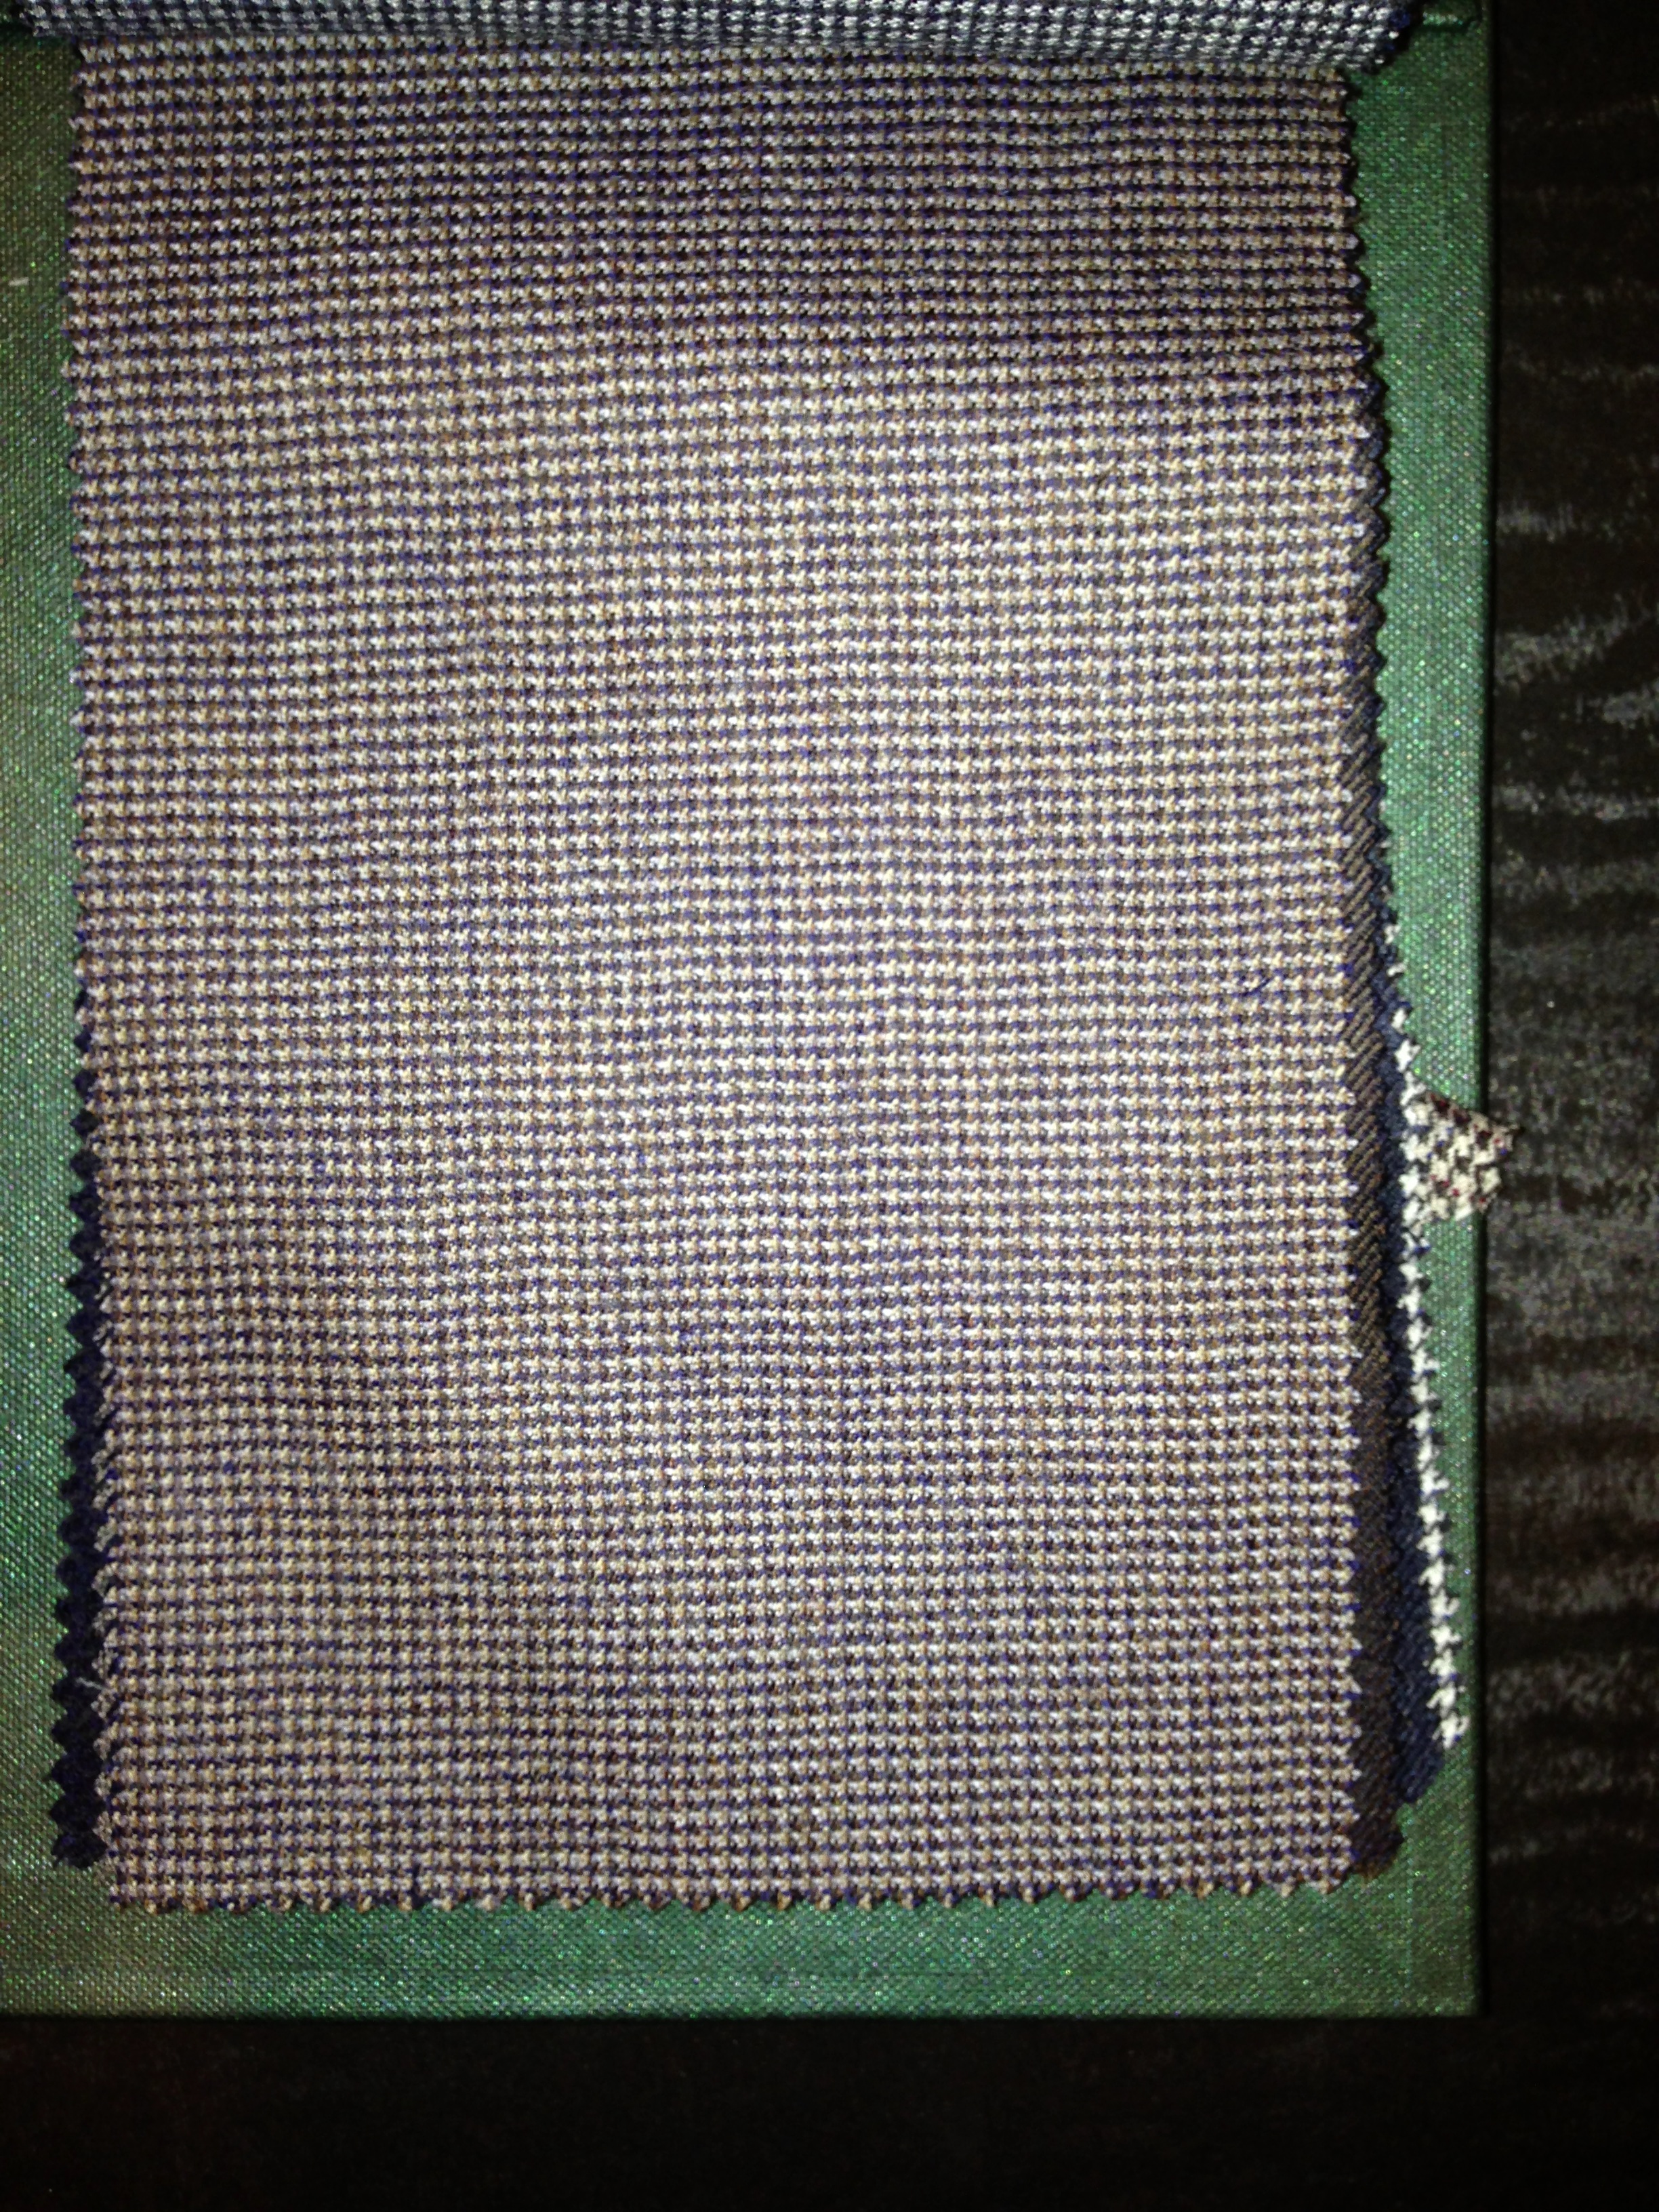 Amazing new sportscoat cloth from Dormeuil's Amadeus jacket collection in a fawn houndstooth.